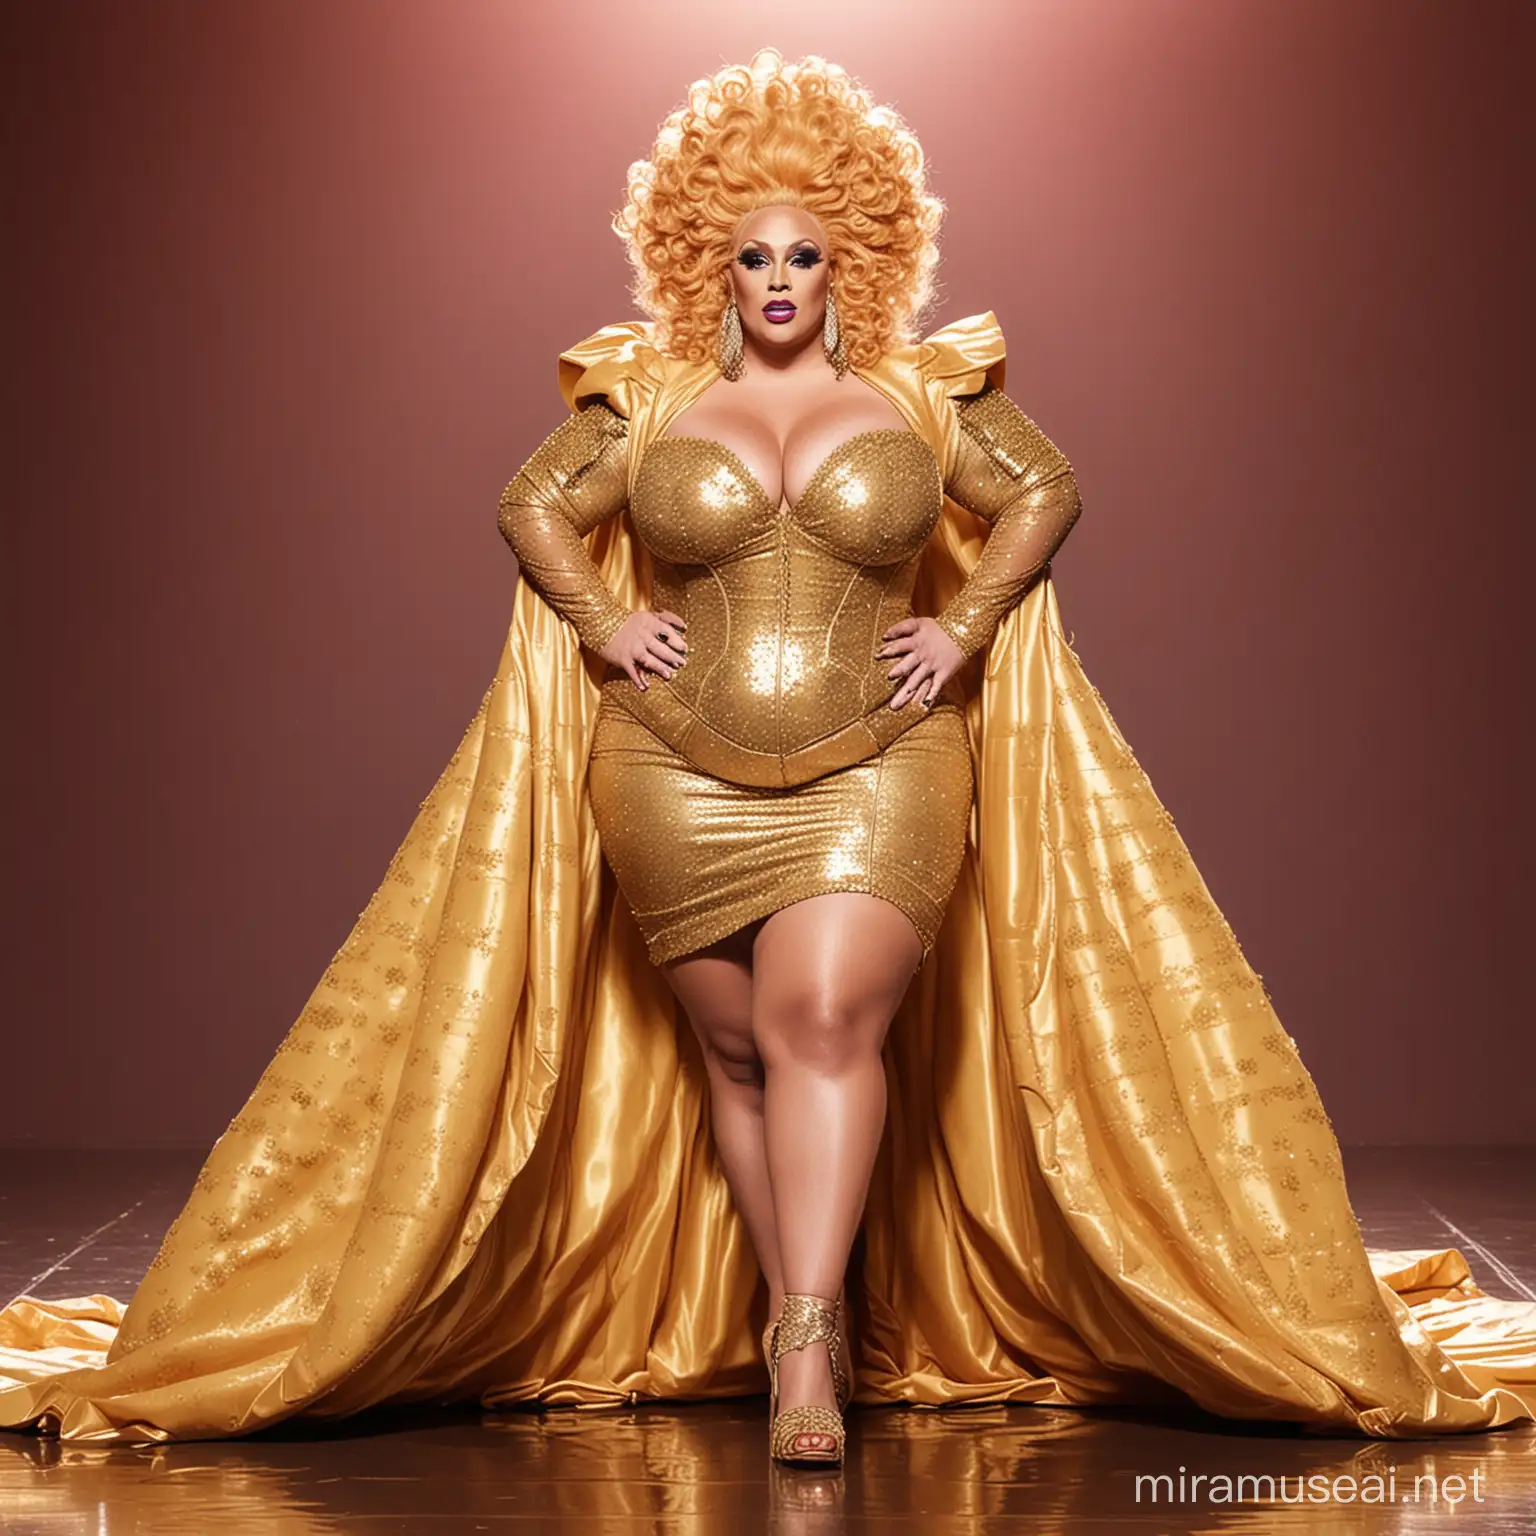 a full body image of a fat caucasian drag queen walking on the Rupaul's Drag race runway wearing an outfit inspired by the prompt: drowning in gold